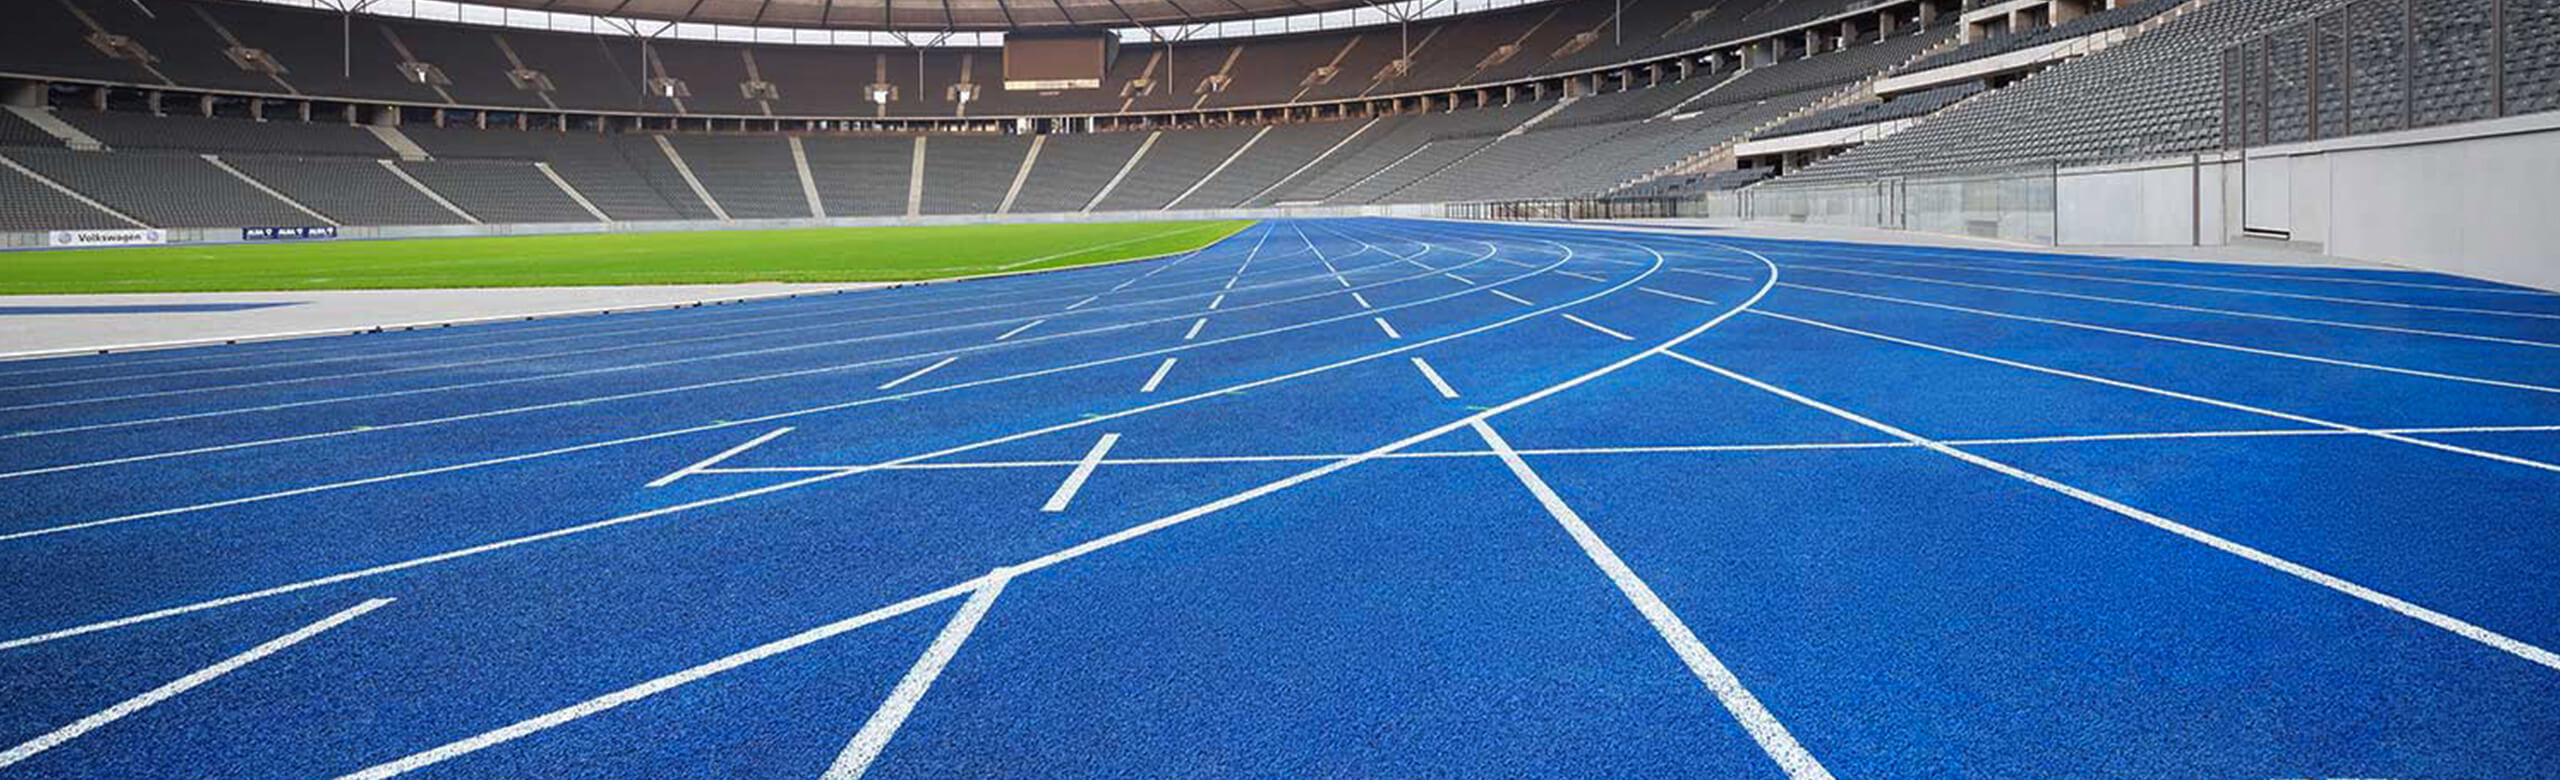 Olympic Stadium in Berlin with blue REGUPOL athletic track